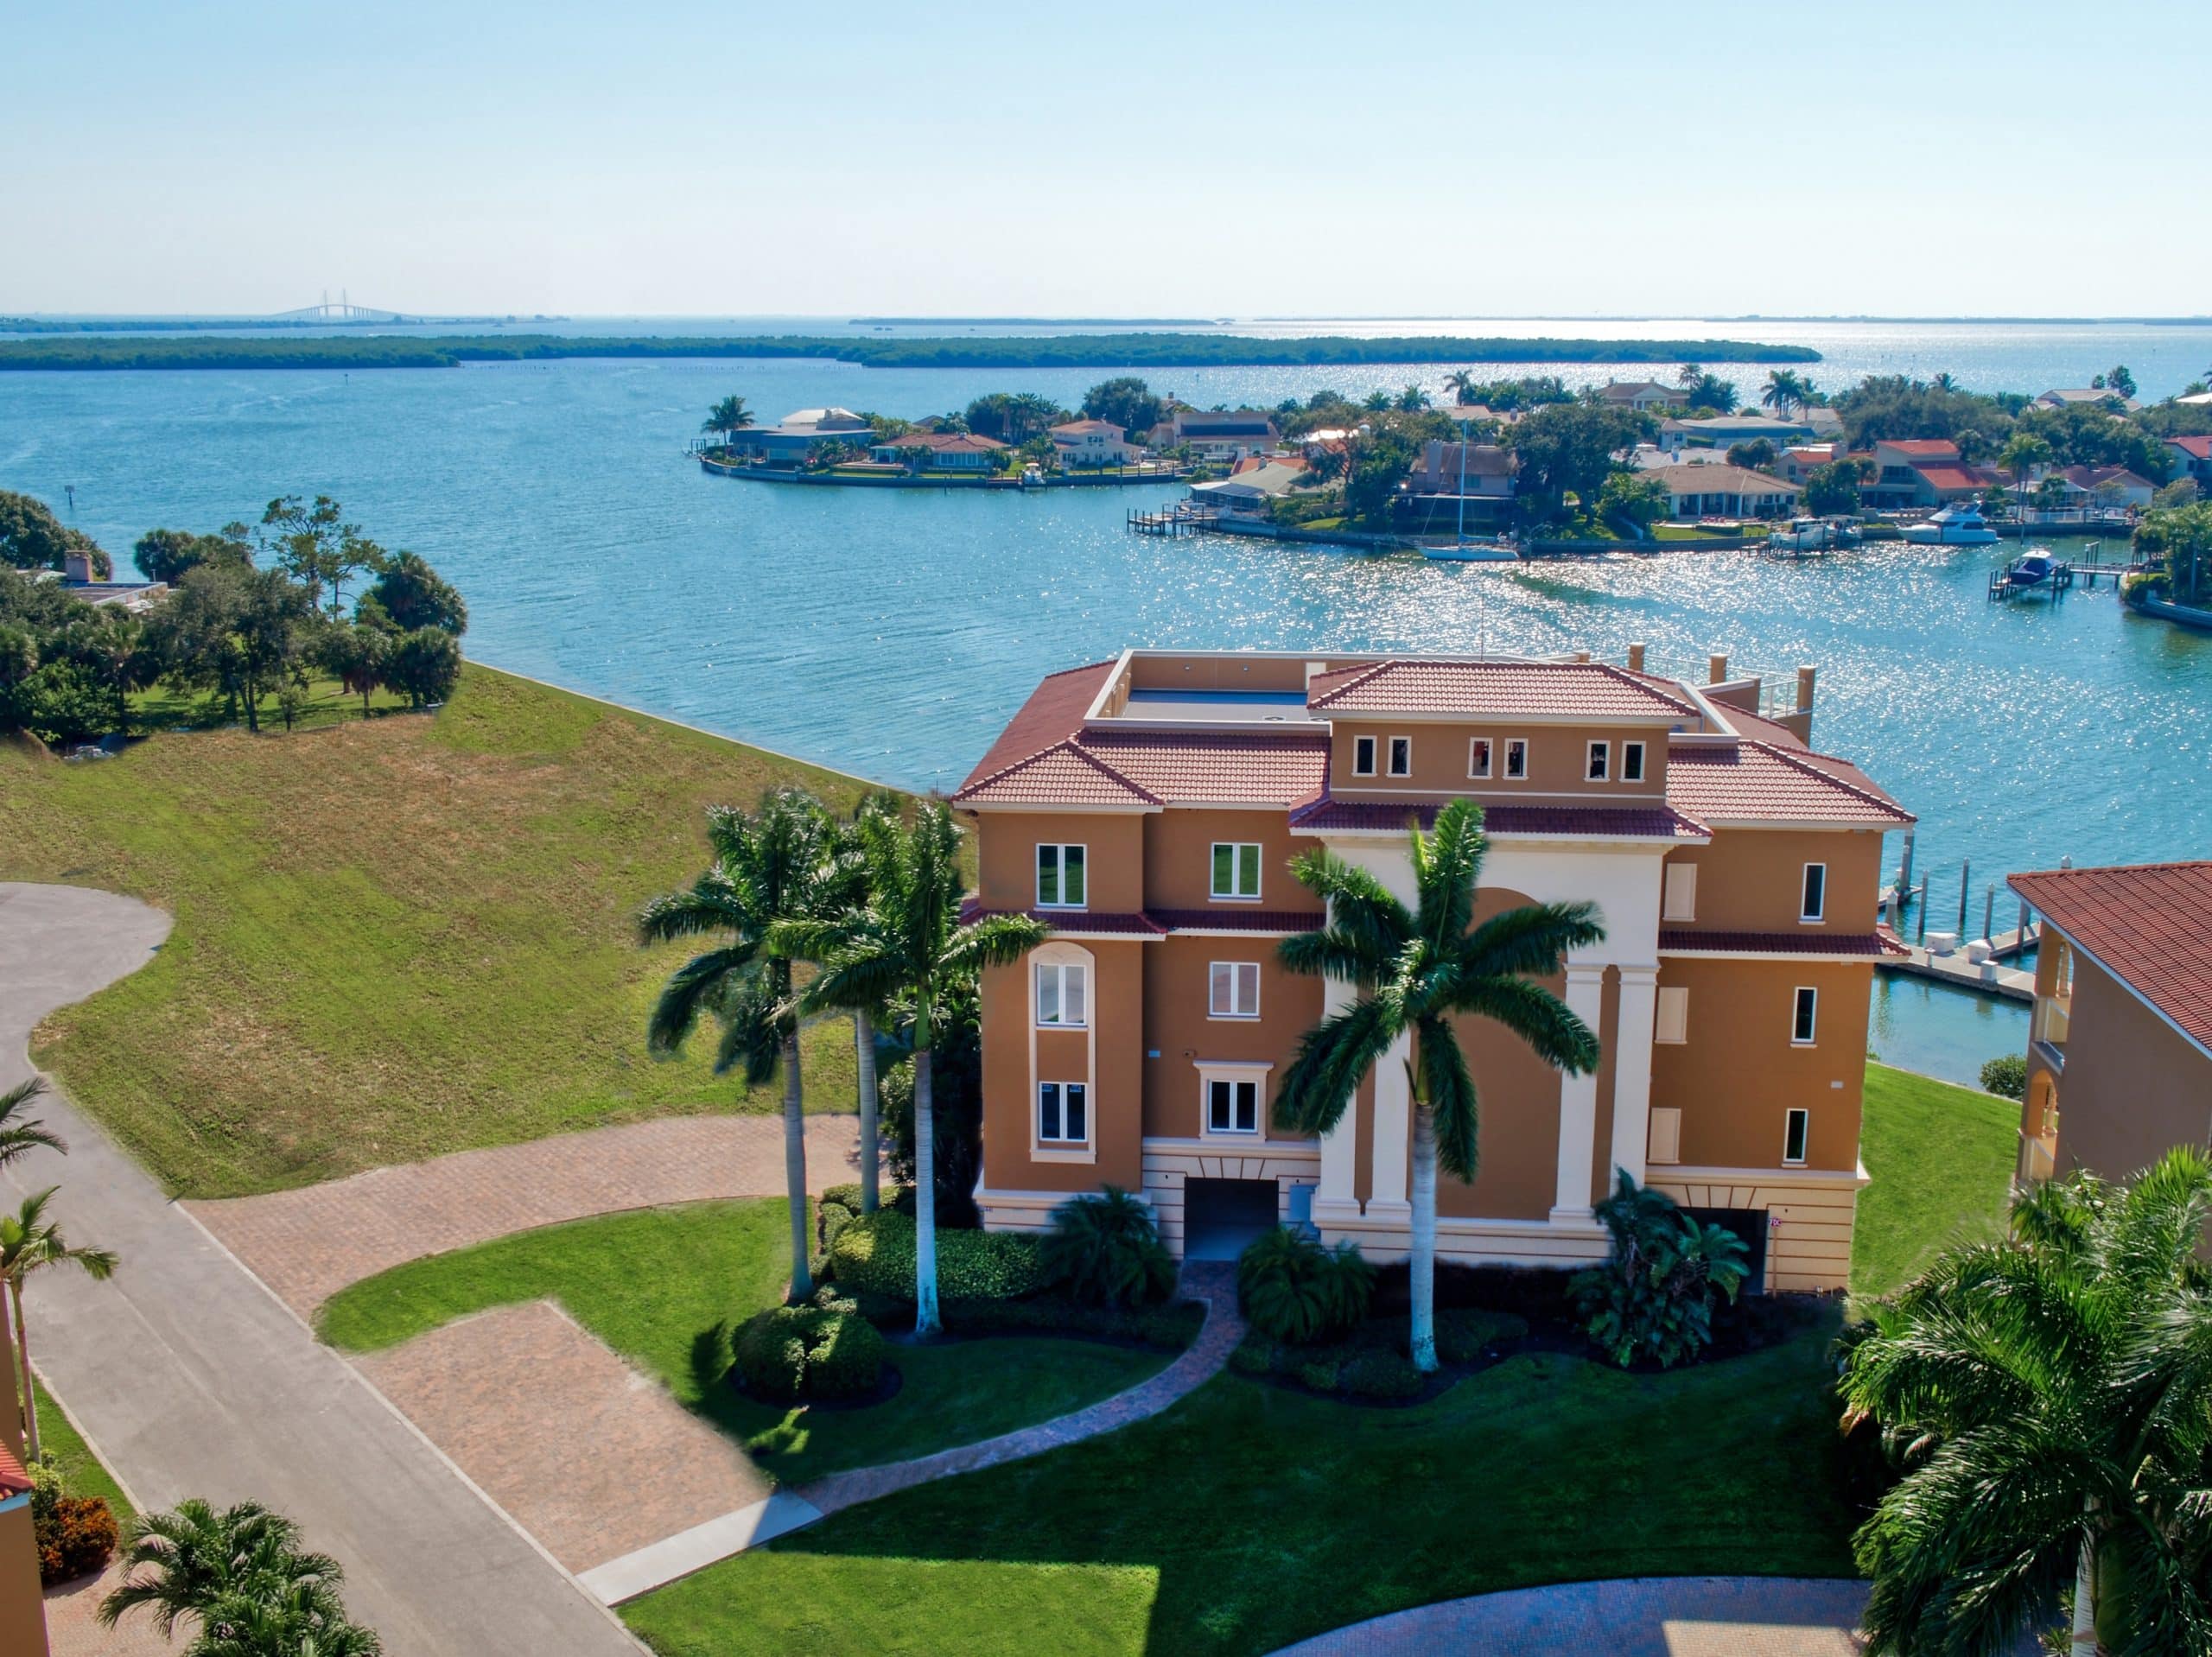 Luxury Waterfront Homes for Sale | Marina Bay St. Petersburg